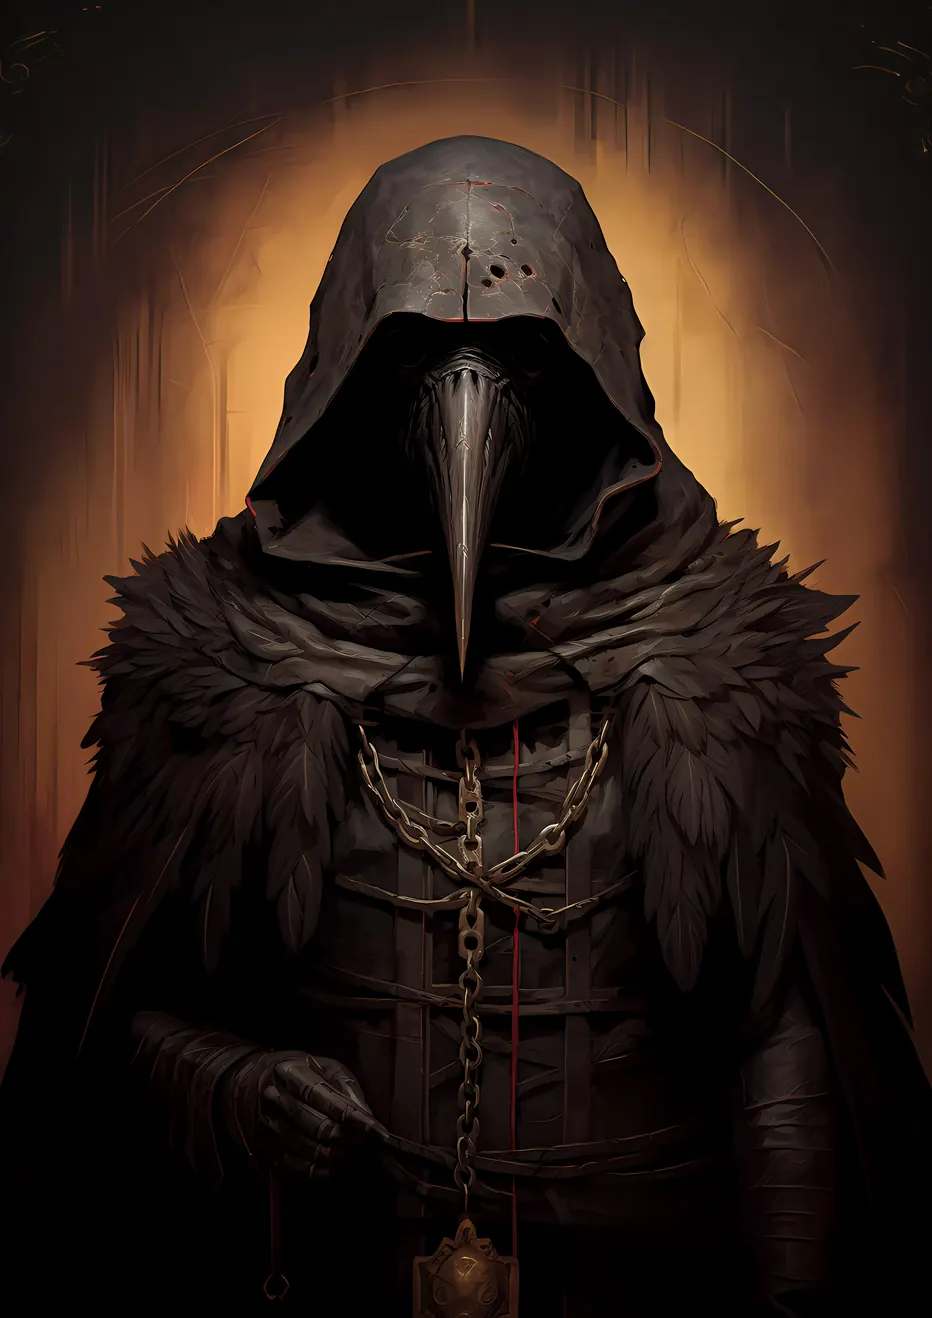 "Terror of a Talons" - A cloaked figure with a crow-like beak stands amidst darkness, draped in a cloak adorned with feathers.